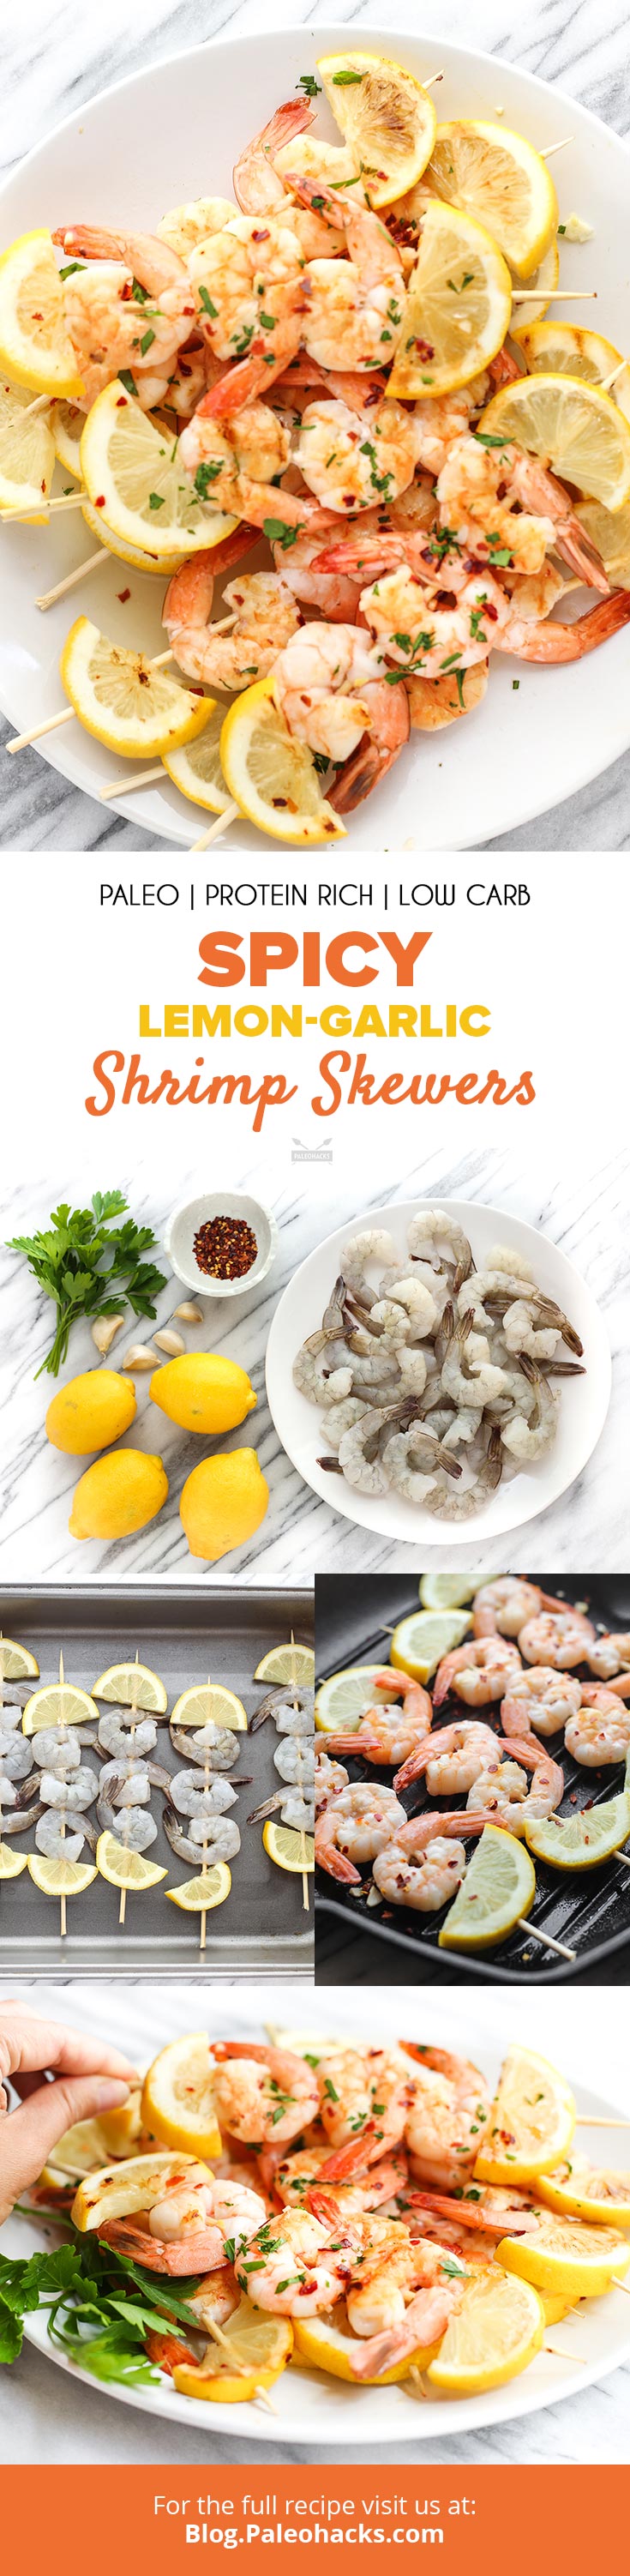 Grill up these mouthwatering Spicy Lemon-Garlic Shrimp Skewers for your next cookout. Your backyard BBQ isn't complete without em'.